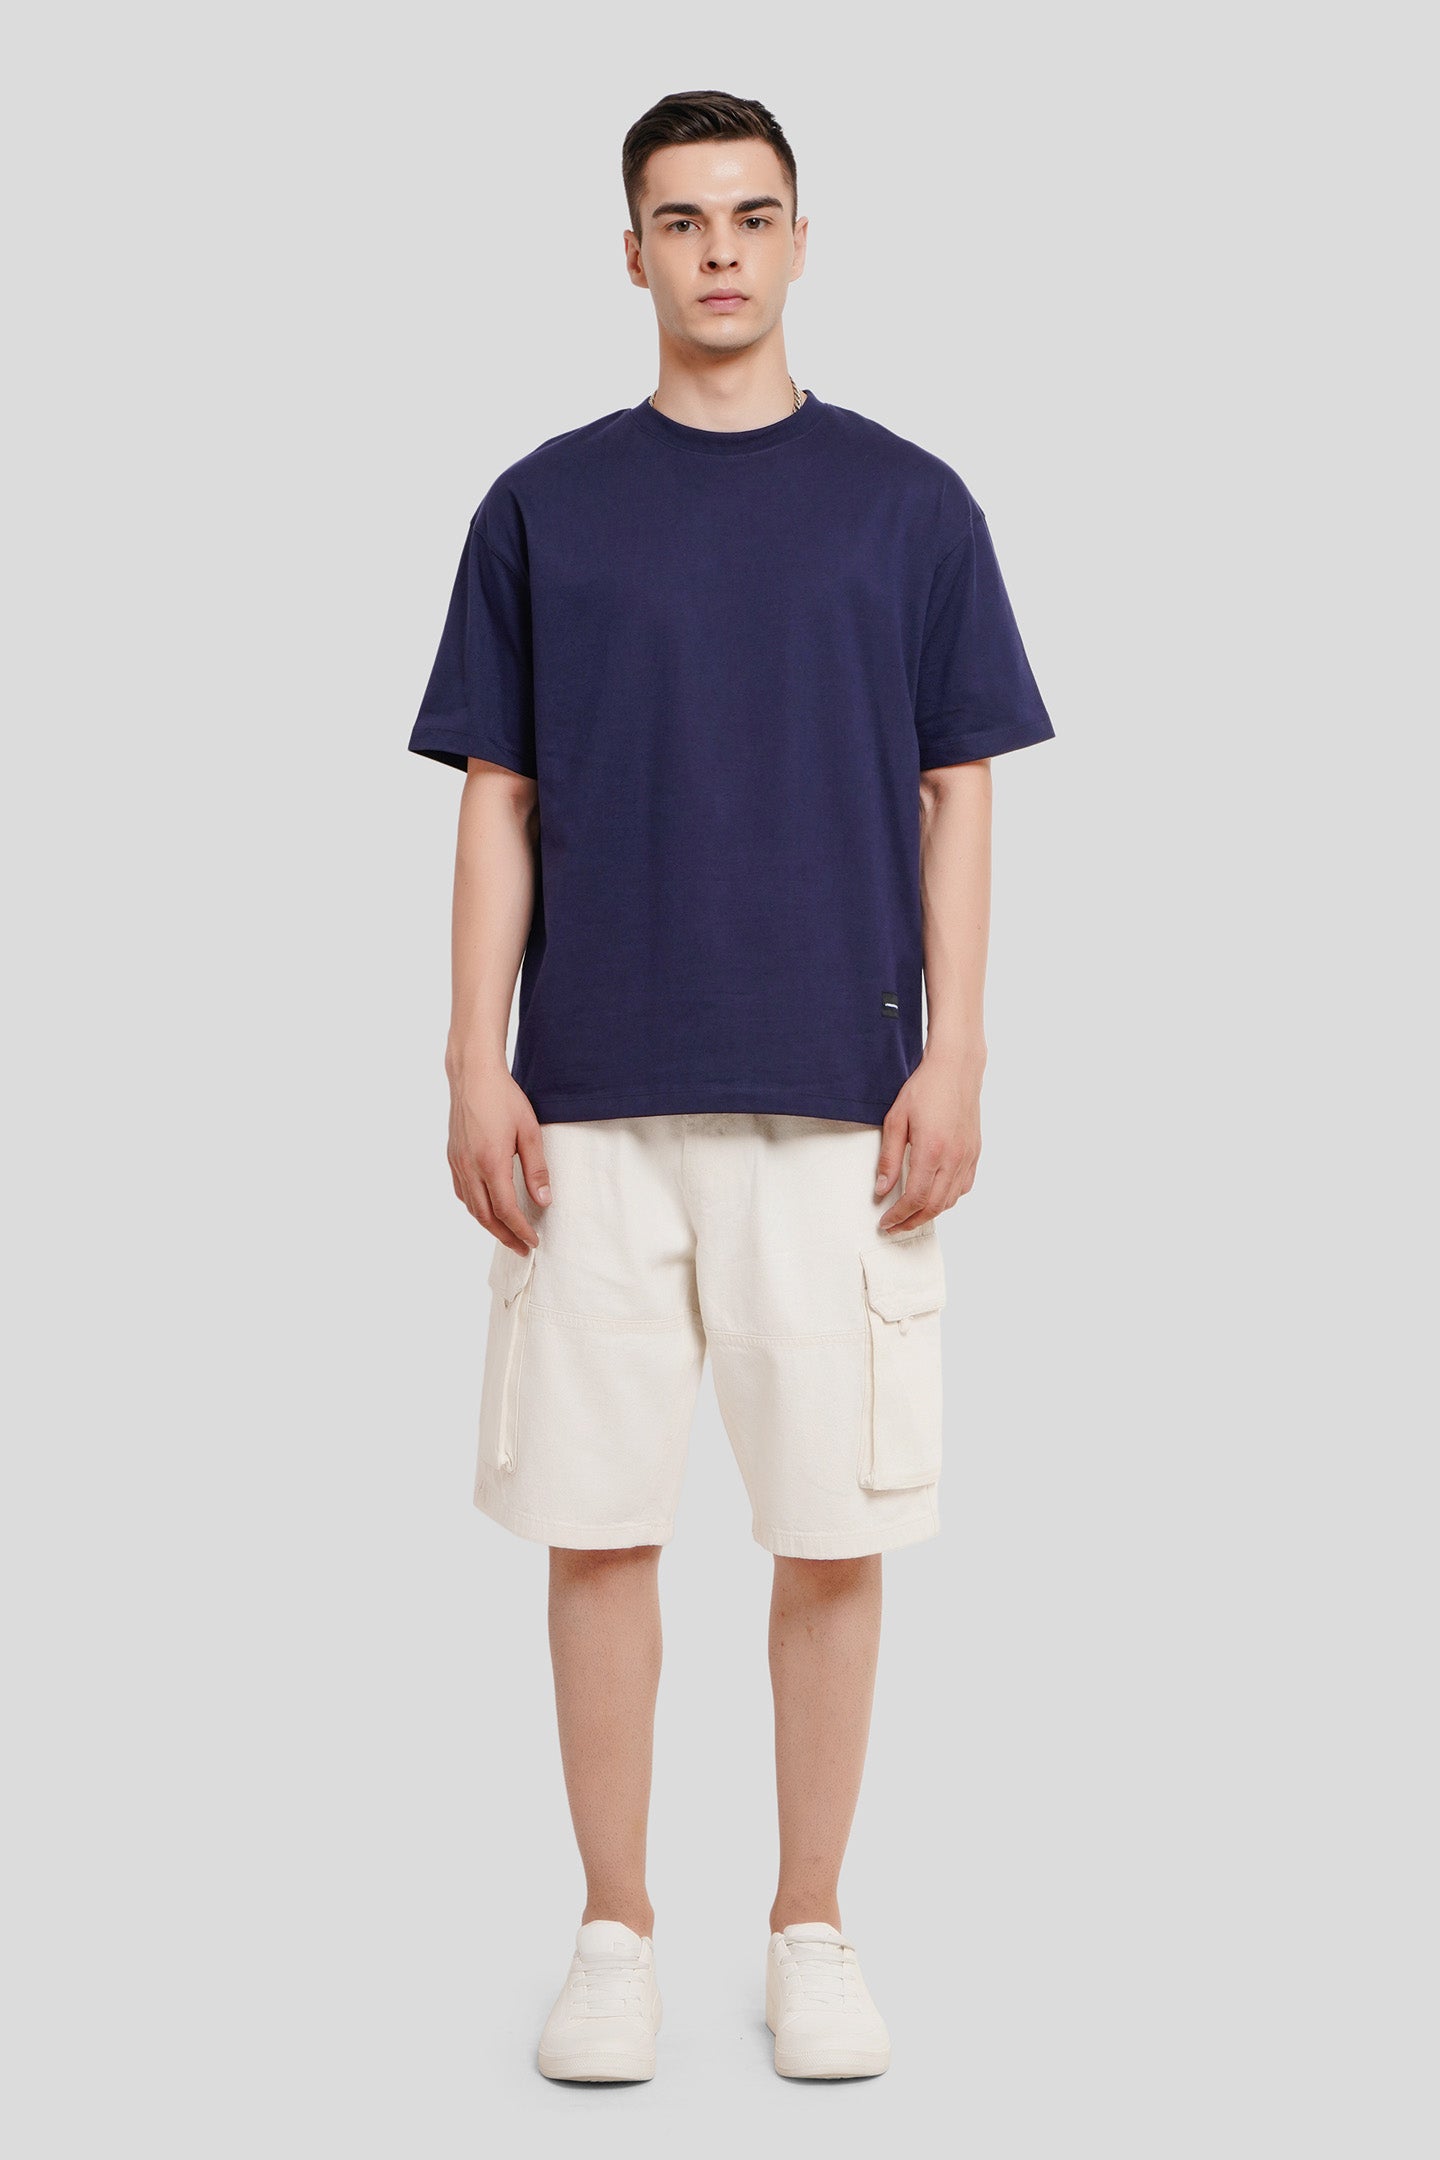 Only Good Vibe Navy Blue Oversized Fit T-Shirt Men Pic 5